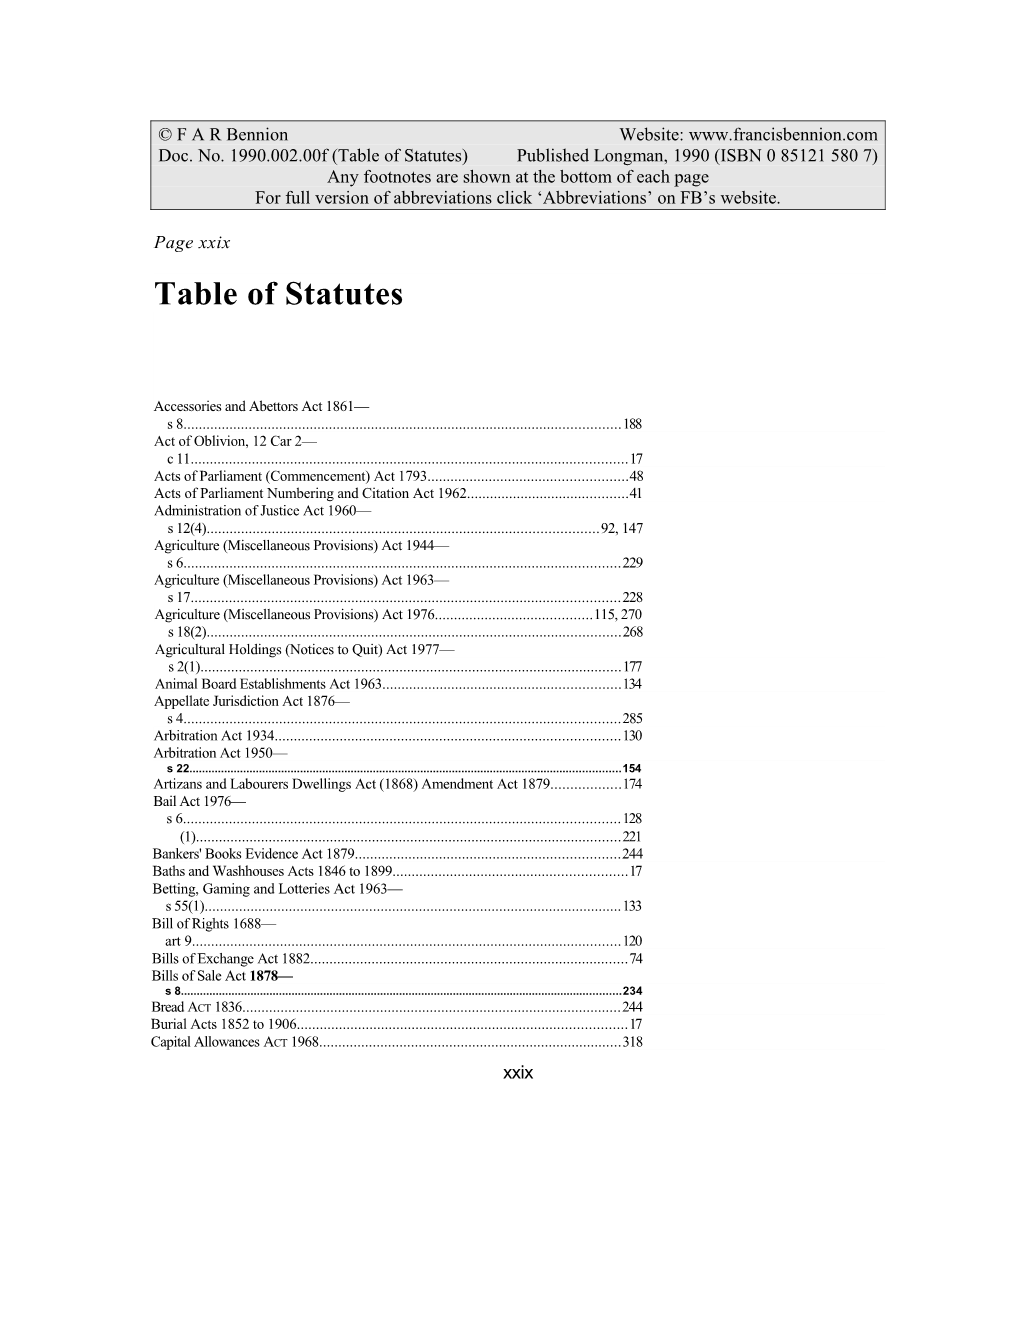 Table of Statutes